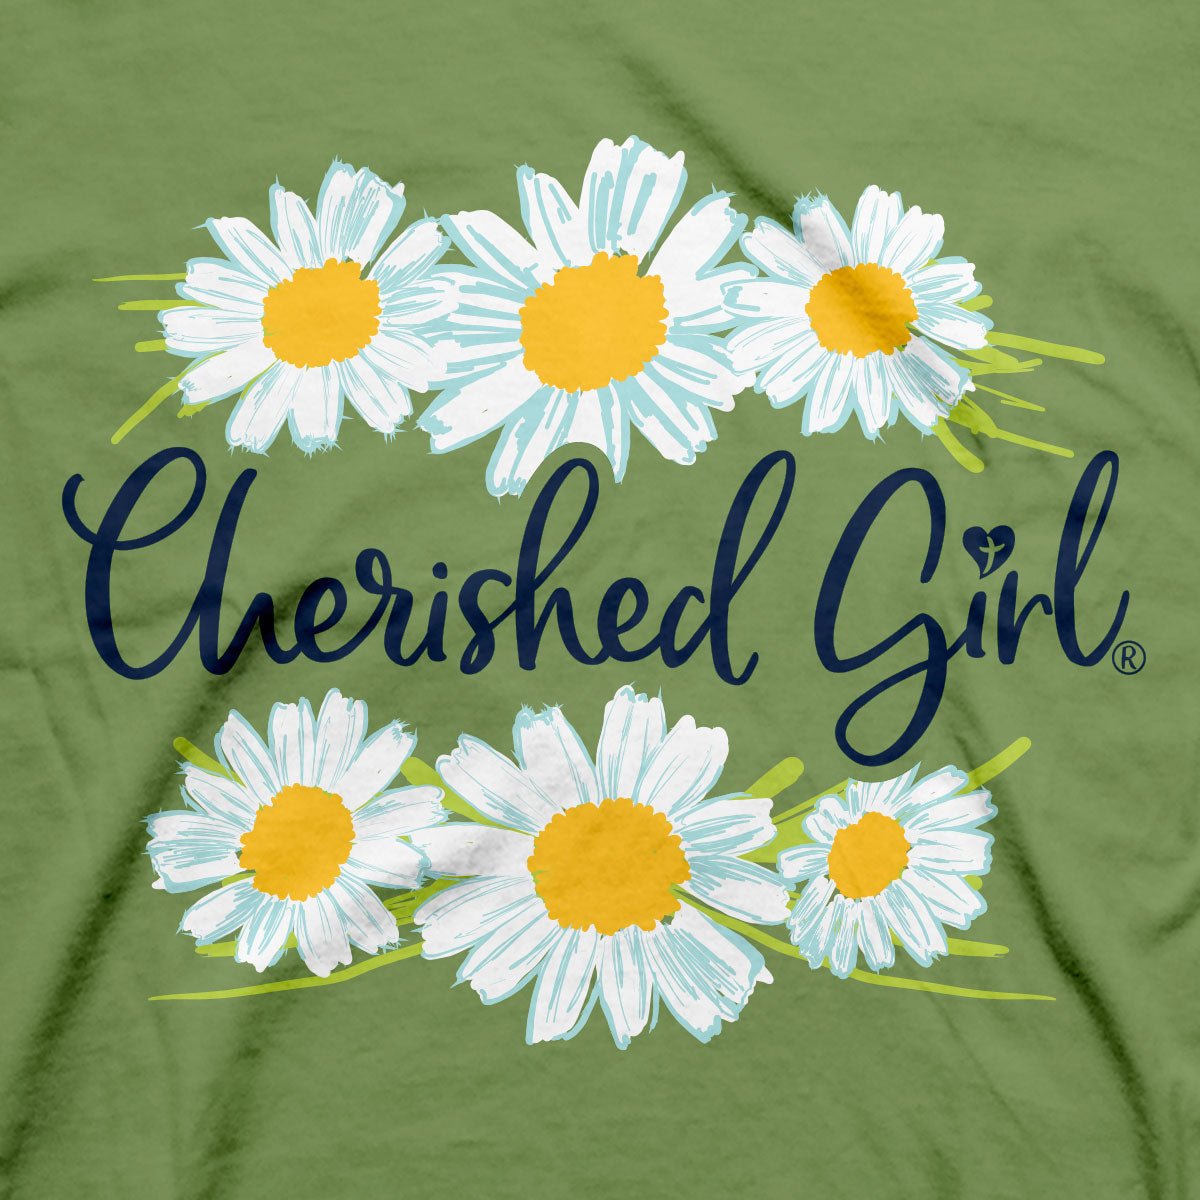 Cherished Girl Womens T-Shirt Too Many Blessings | 2FruitBearers